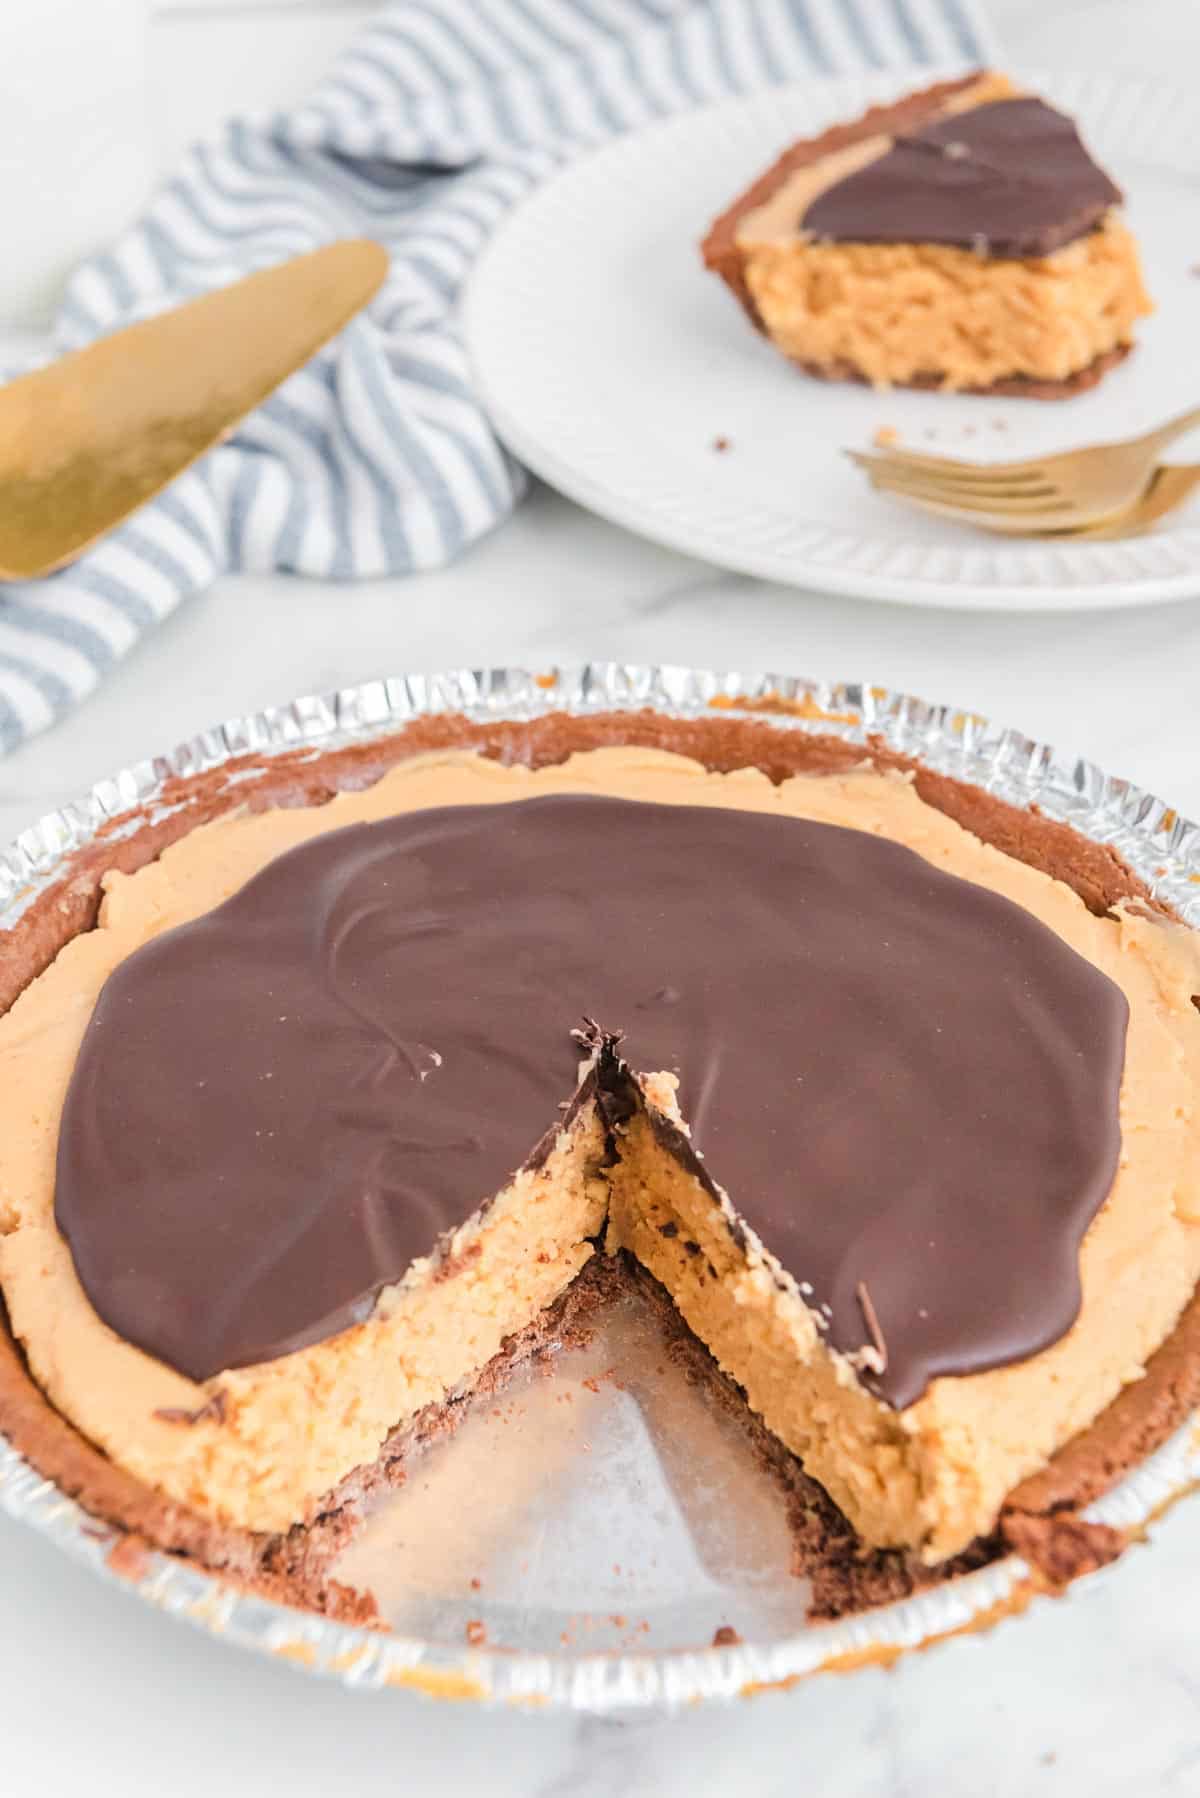 A pie with a chocolate topping and peanut butter filling, with one slice missing. A slice is served on a plate in the background.